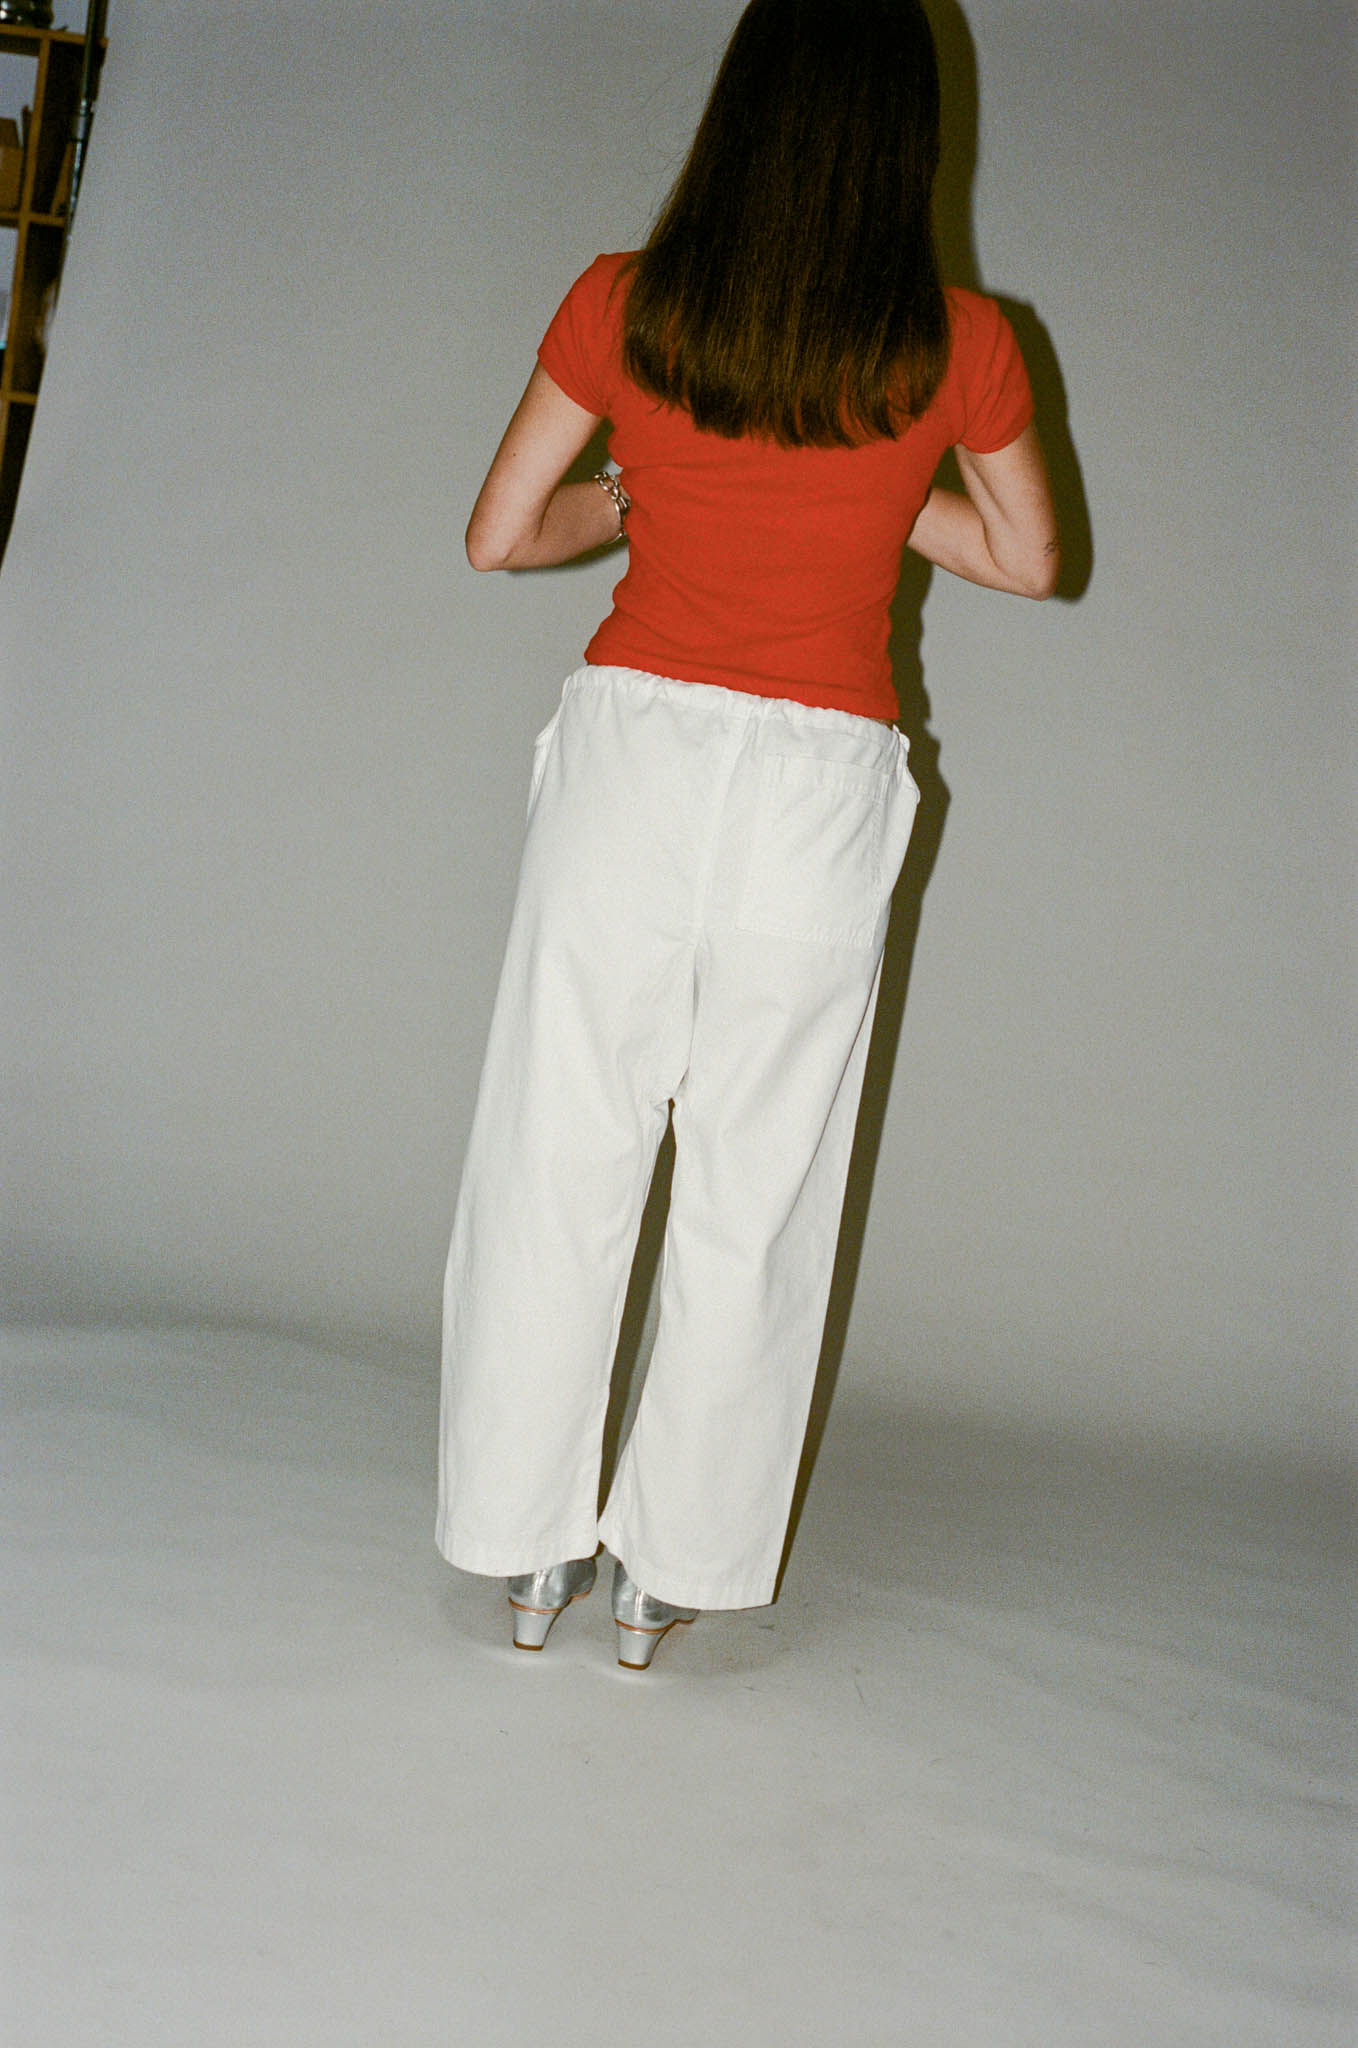 Gil Rodriguez The Lou Pant in Cream